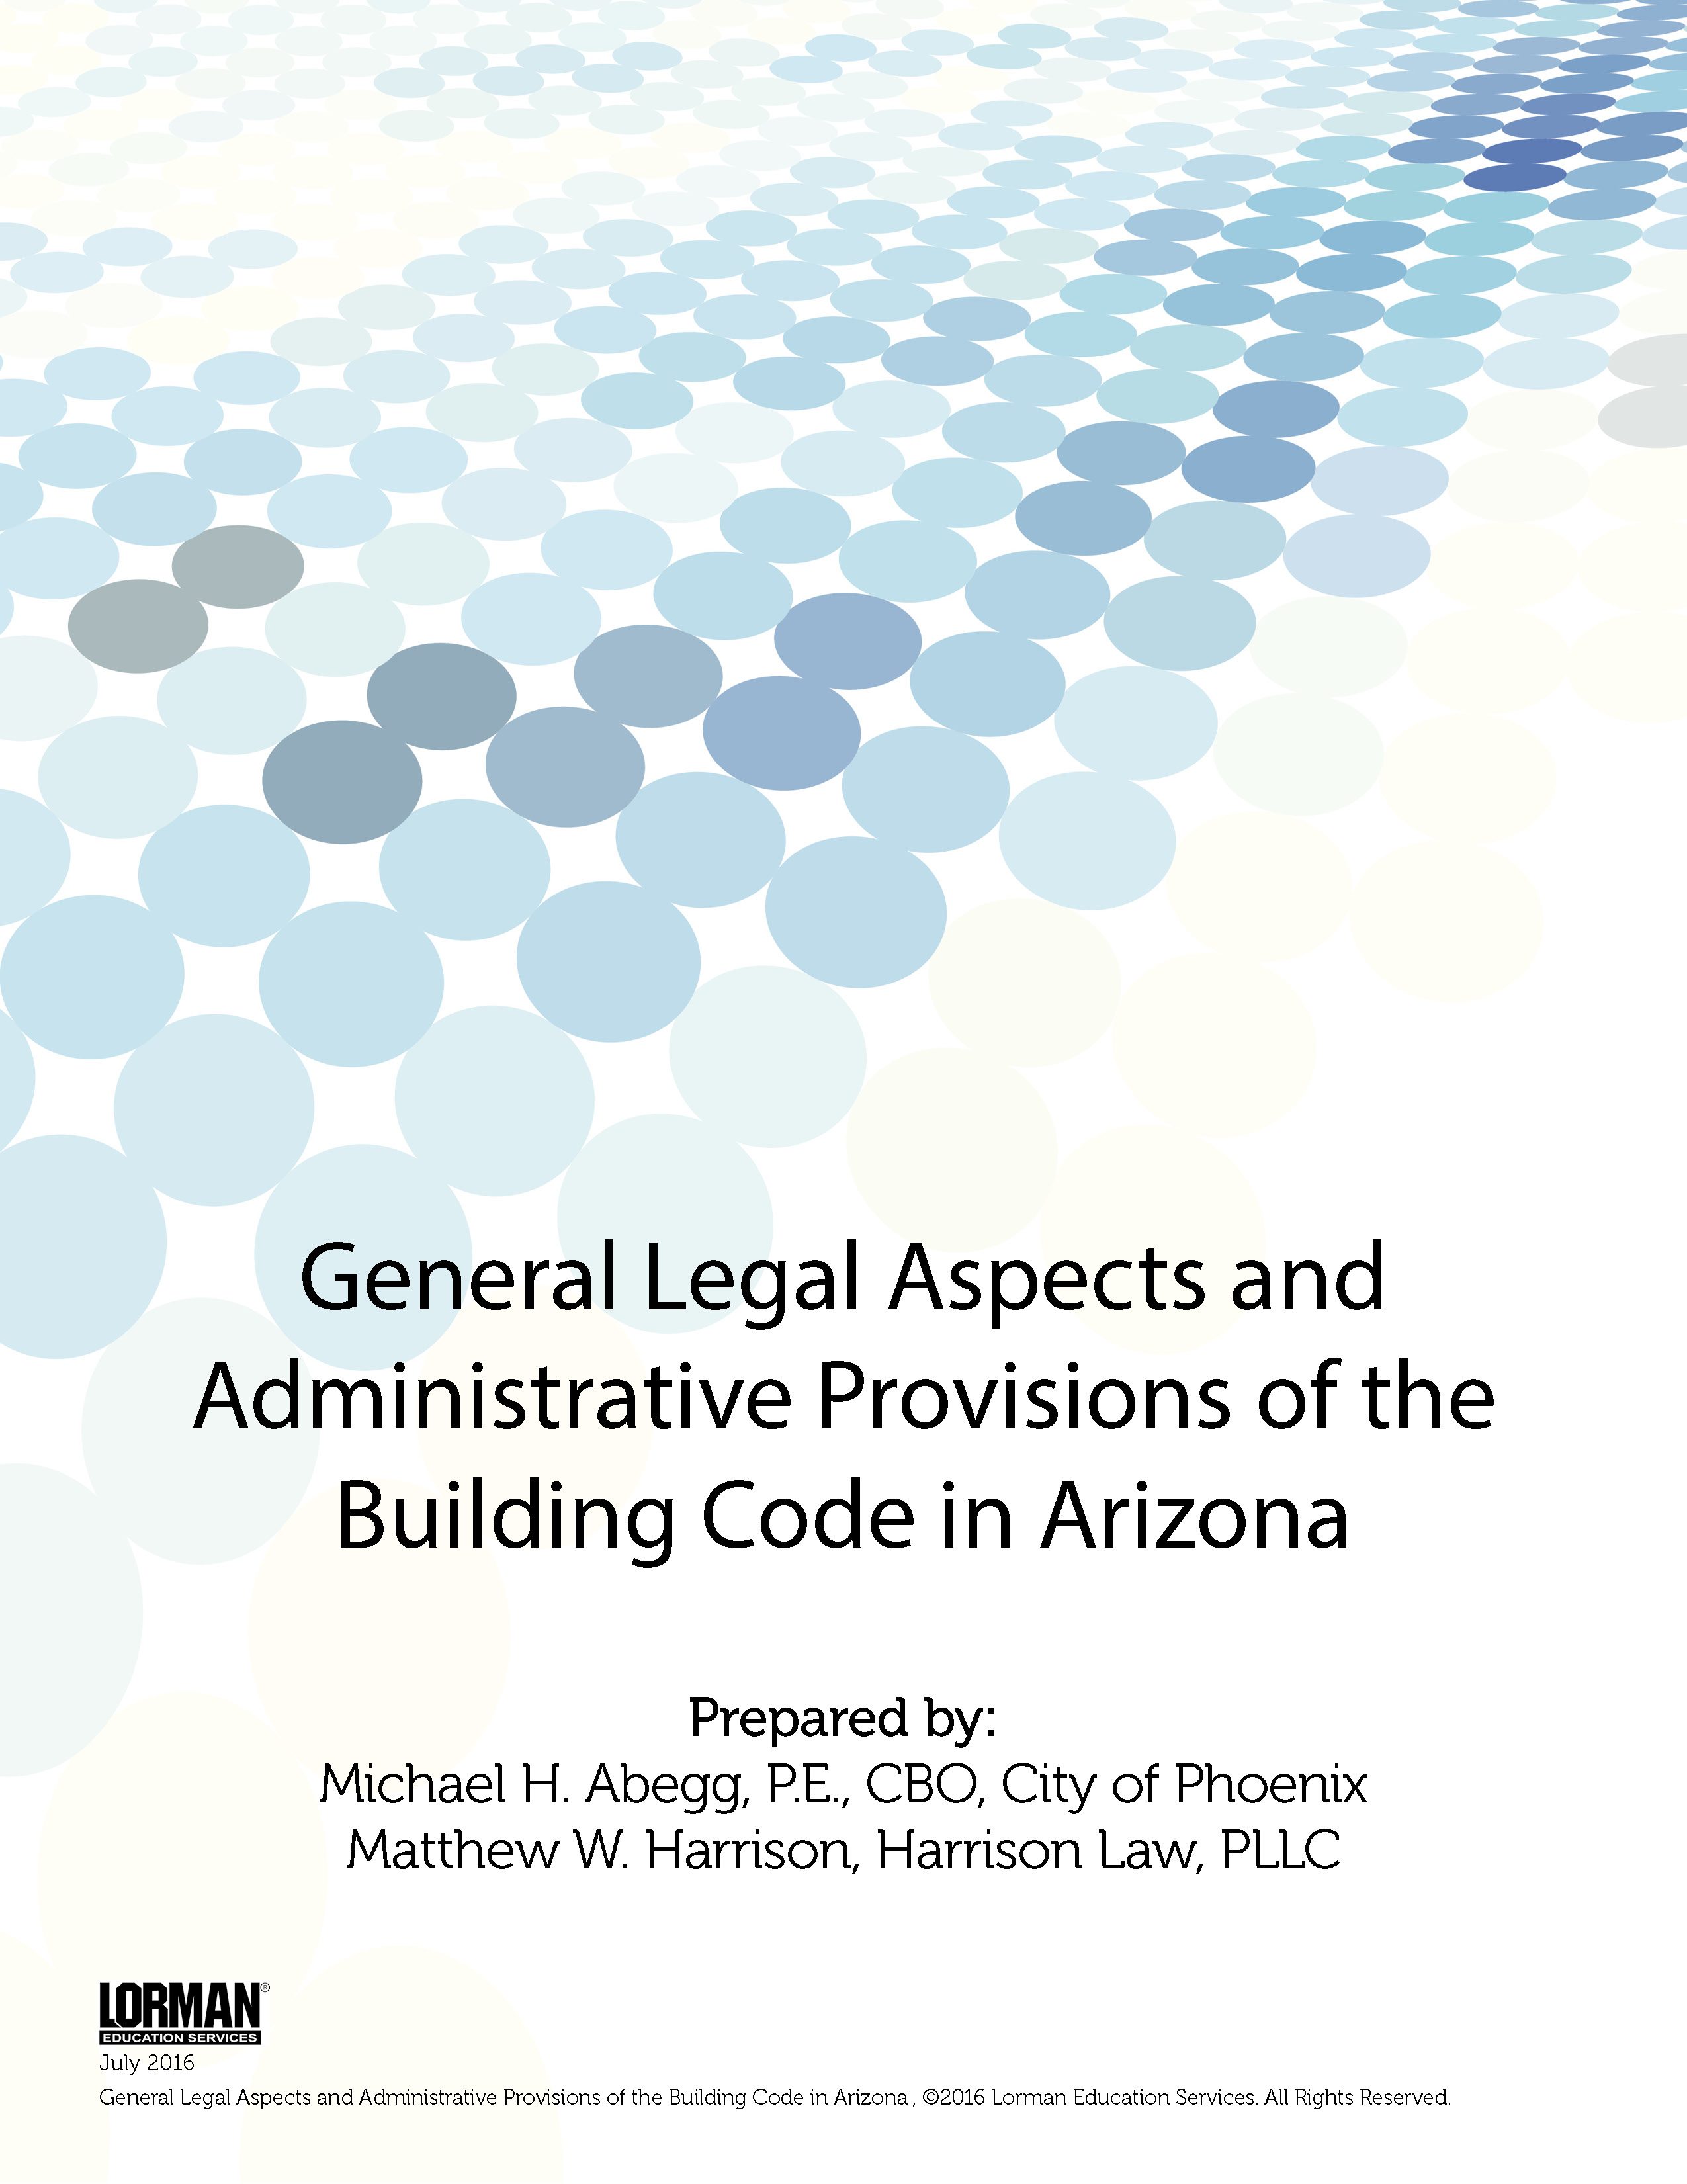 General Legal Aspects and Administrative Provisions of the Building Code in Arizona